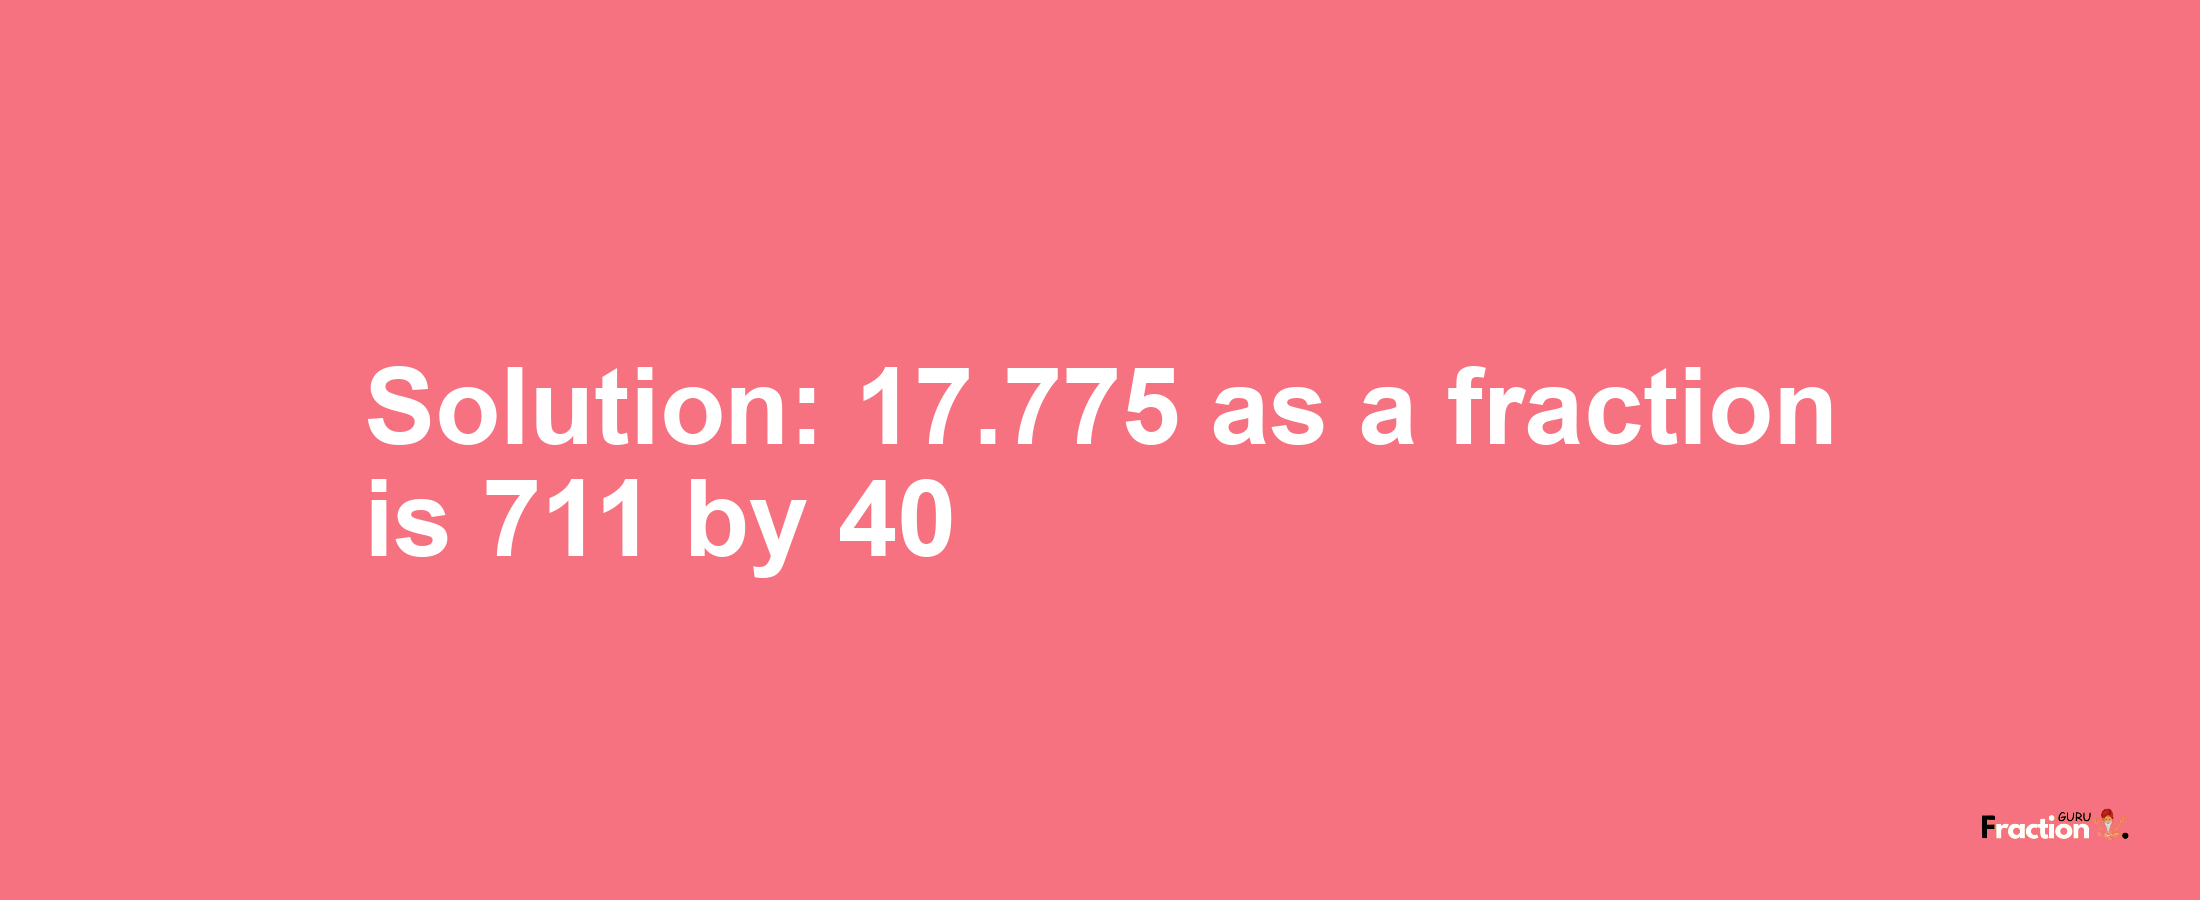 Solution:17.775 as a fraction is 711/40